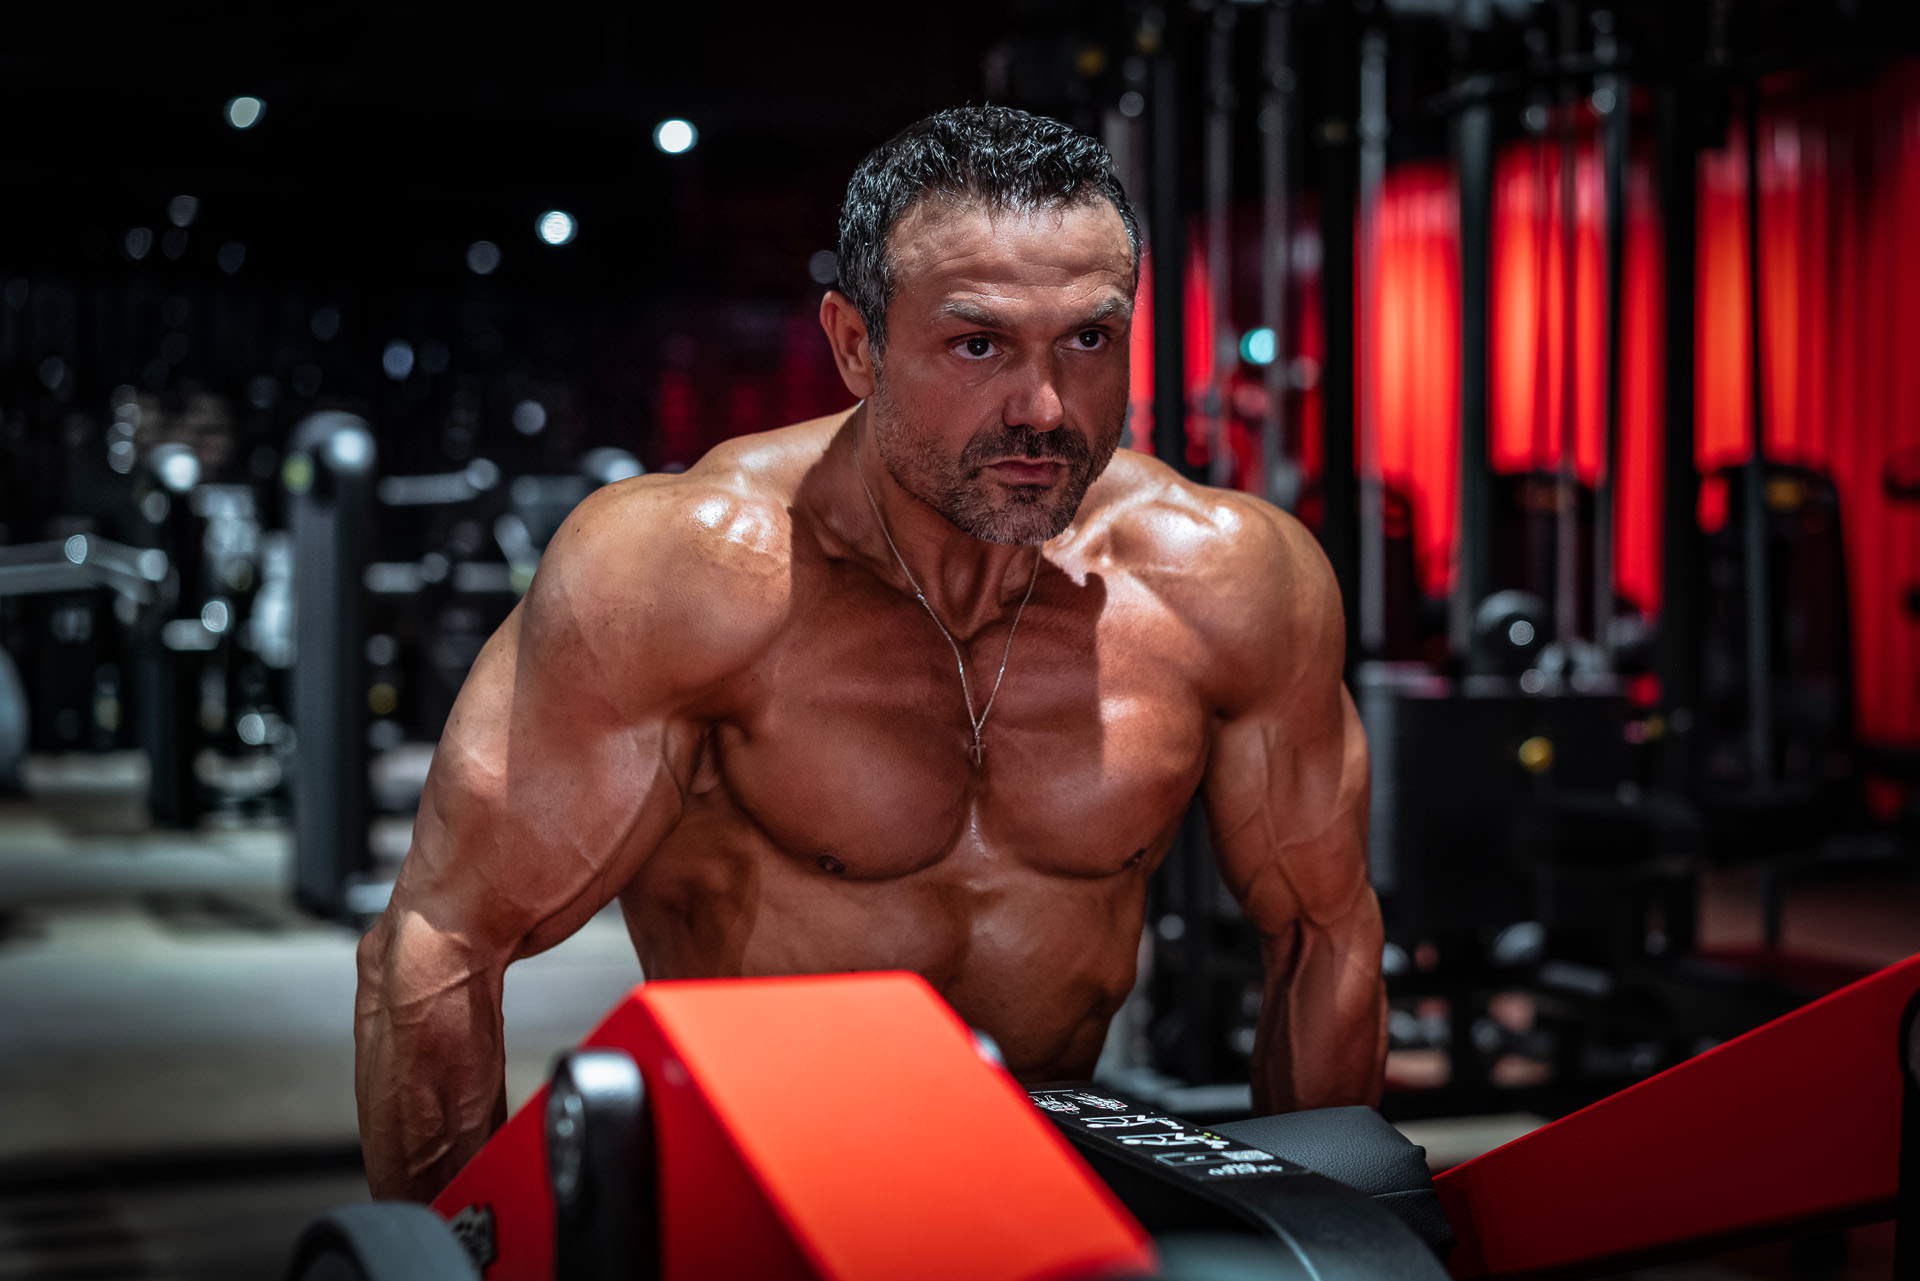 2019-03-04 - Enzo - Muscle & Fitness - 06714 - 1920px